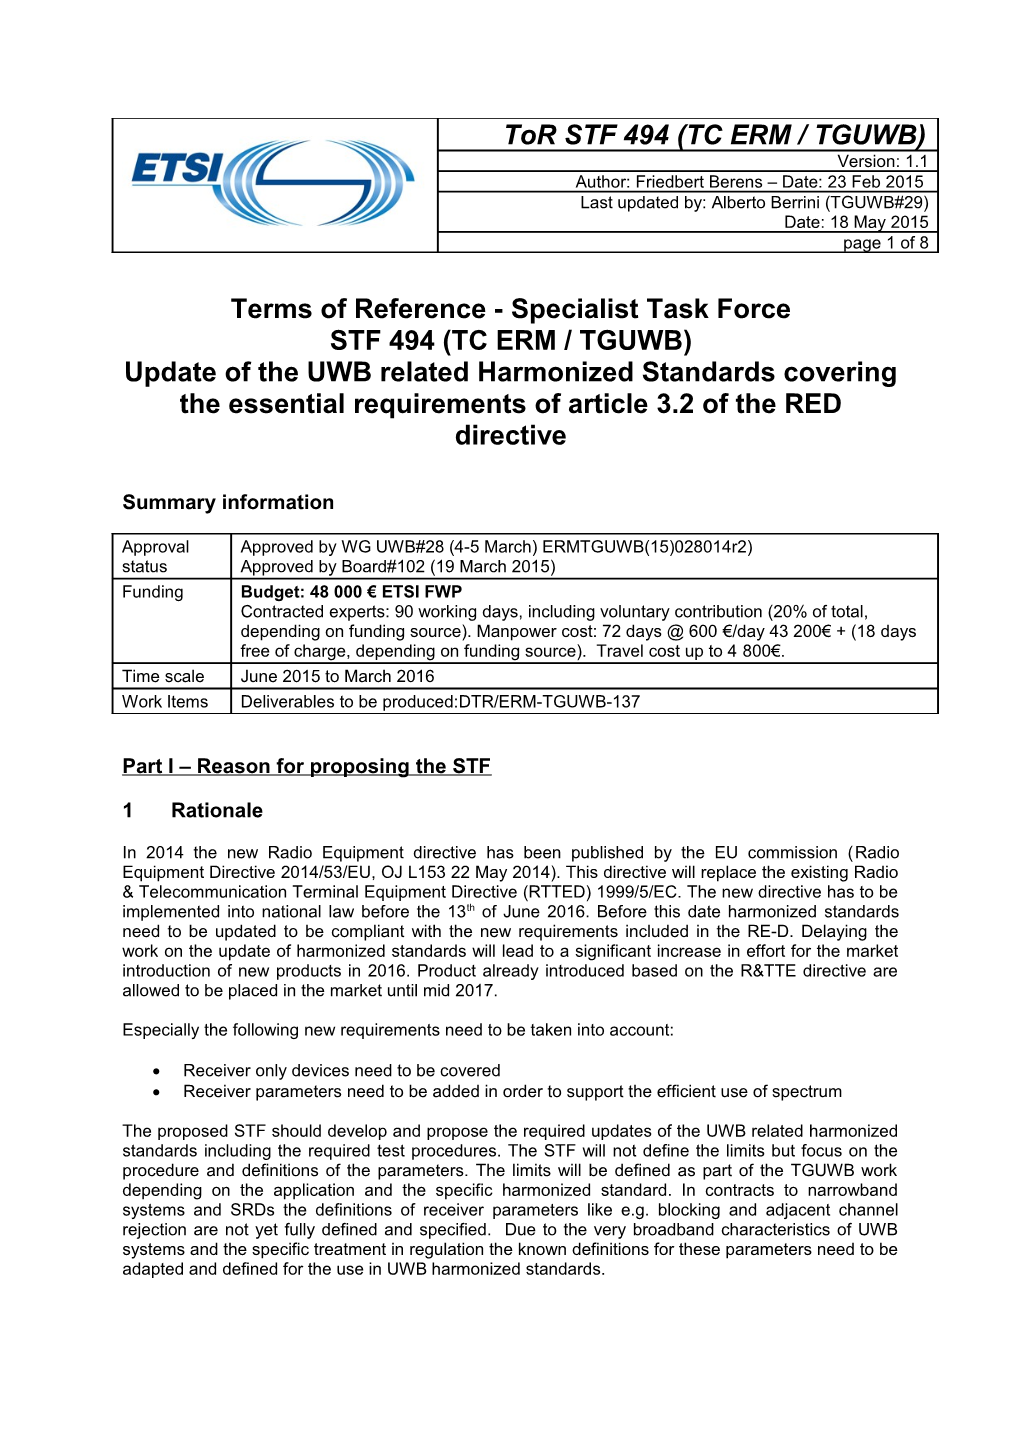 Terms of Reference - Specialist Task Force